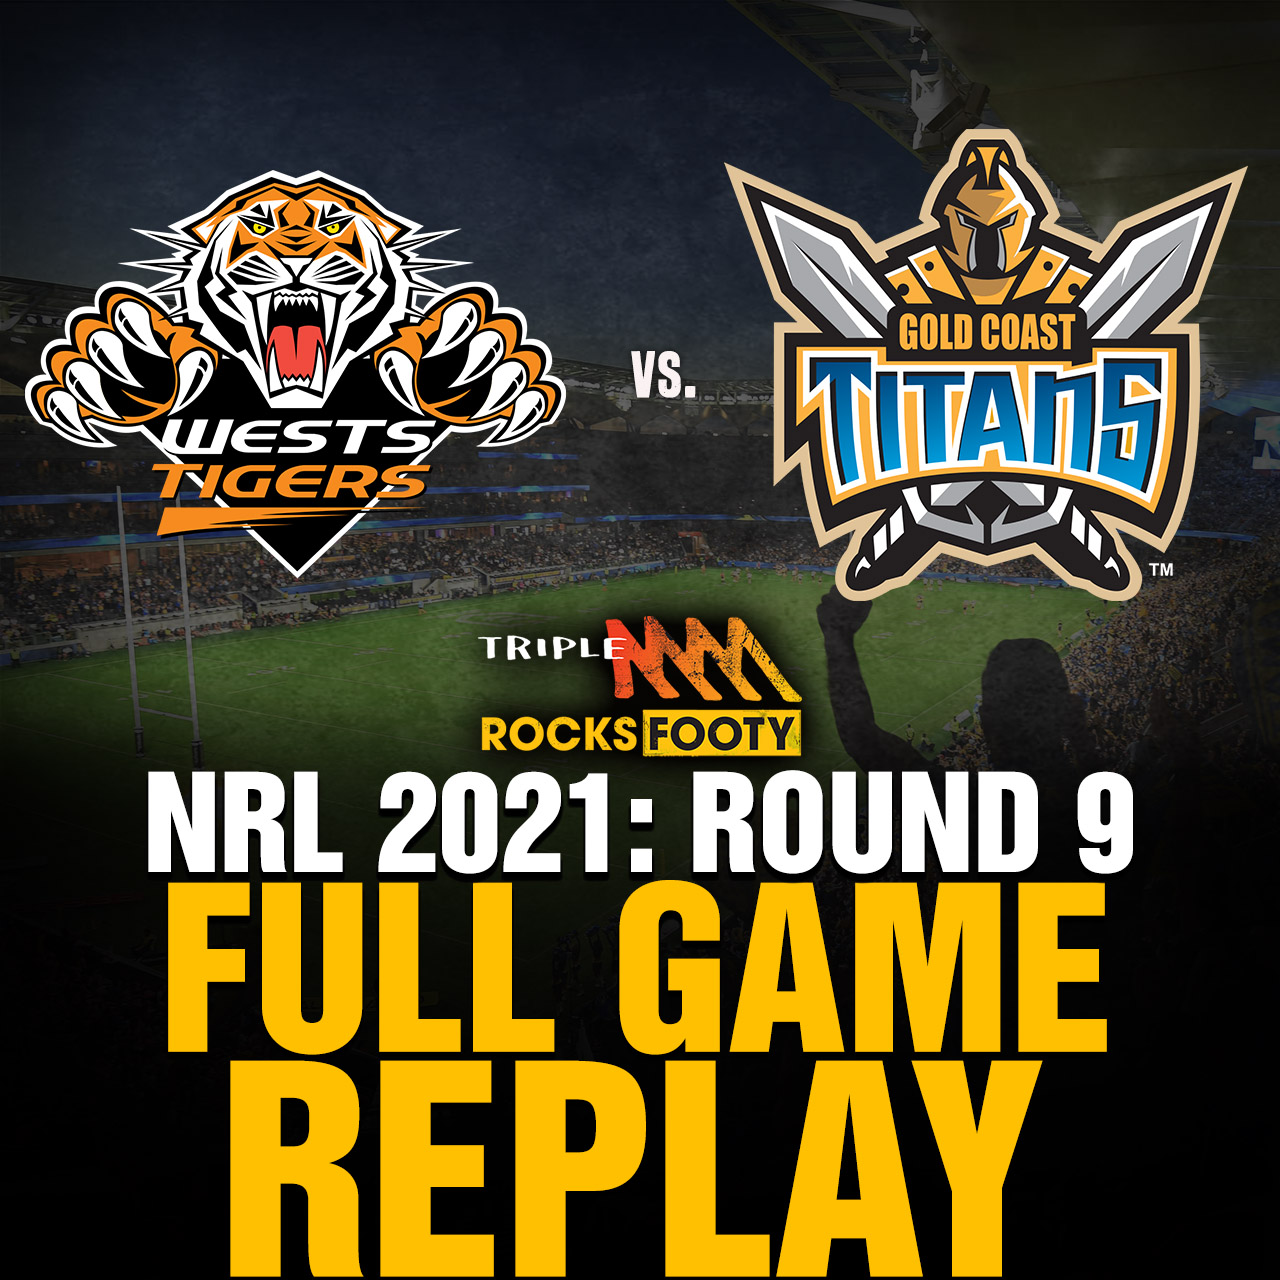 FULL GAME REPLAY | Wests Tigers vs. Gold Coast Titans